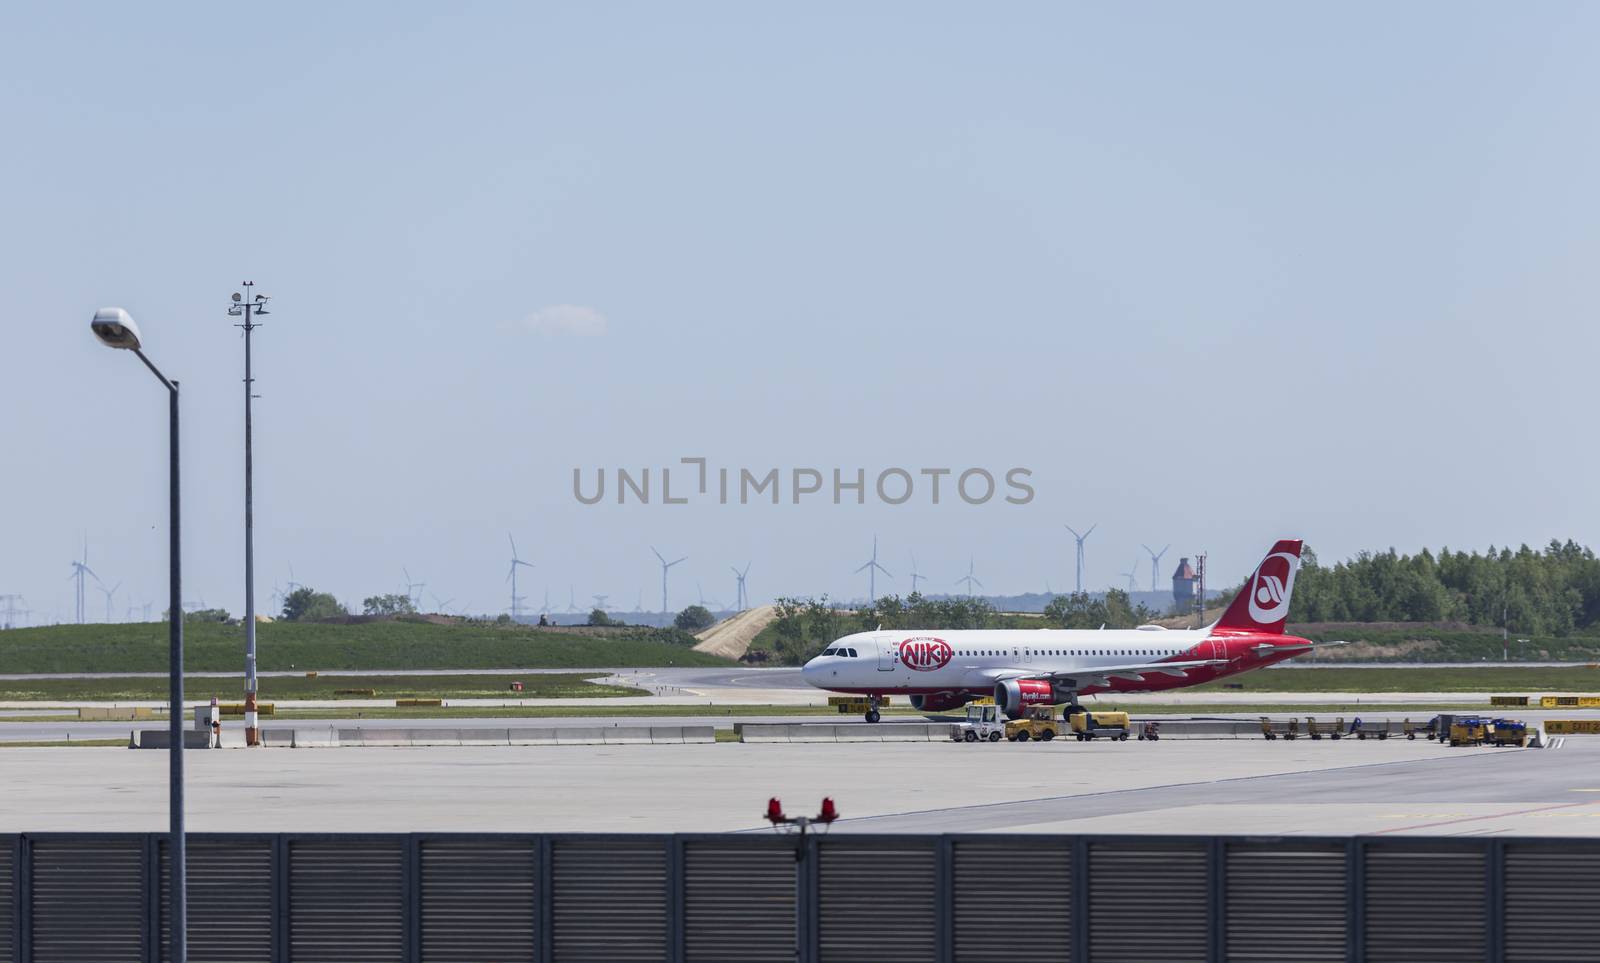 VIENNA, AUSTRIA – APRIL 30th 2016: Plane moving to take off area at Vienna International Airport on a busy Saturday.